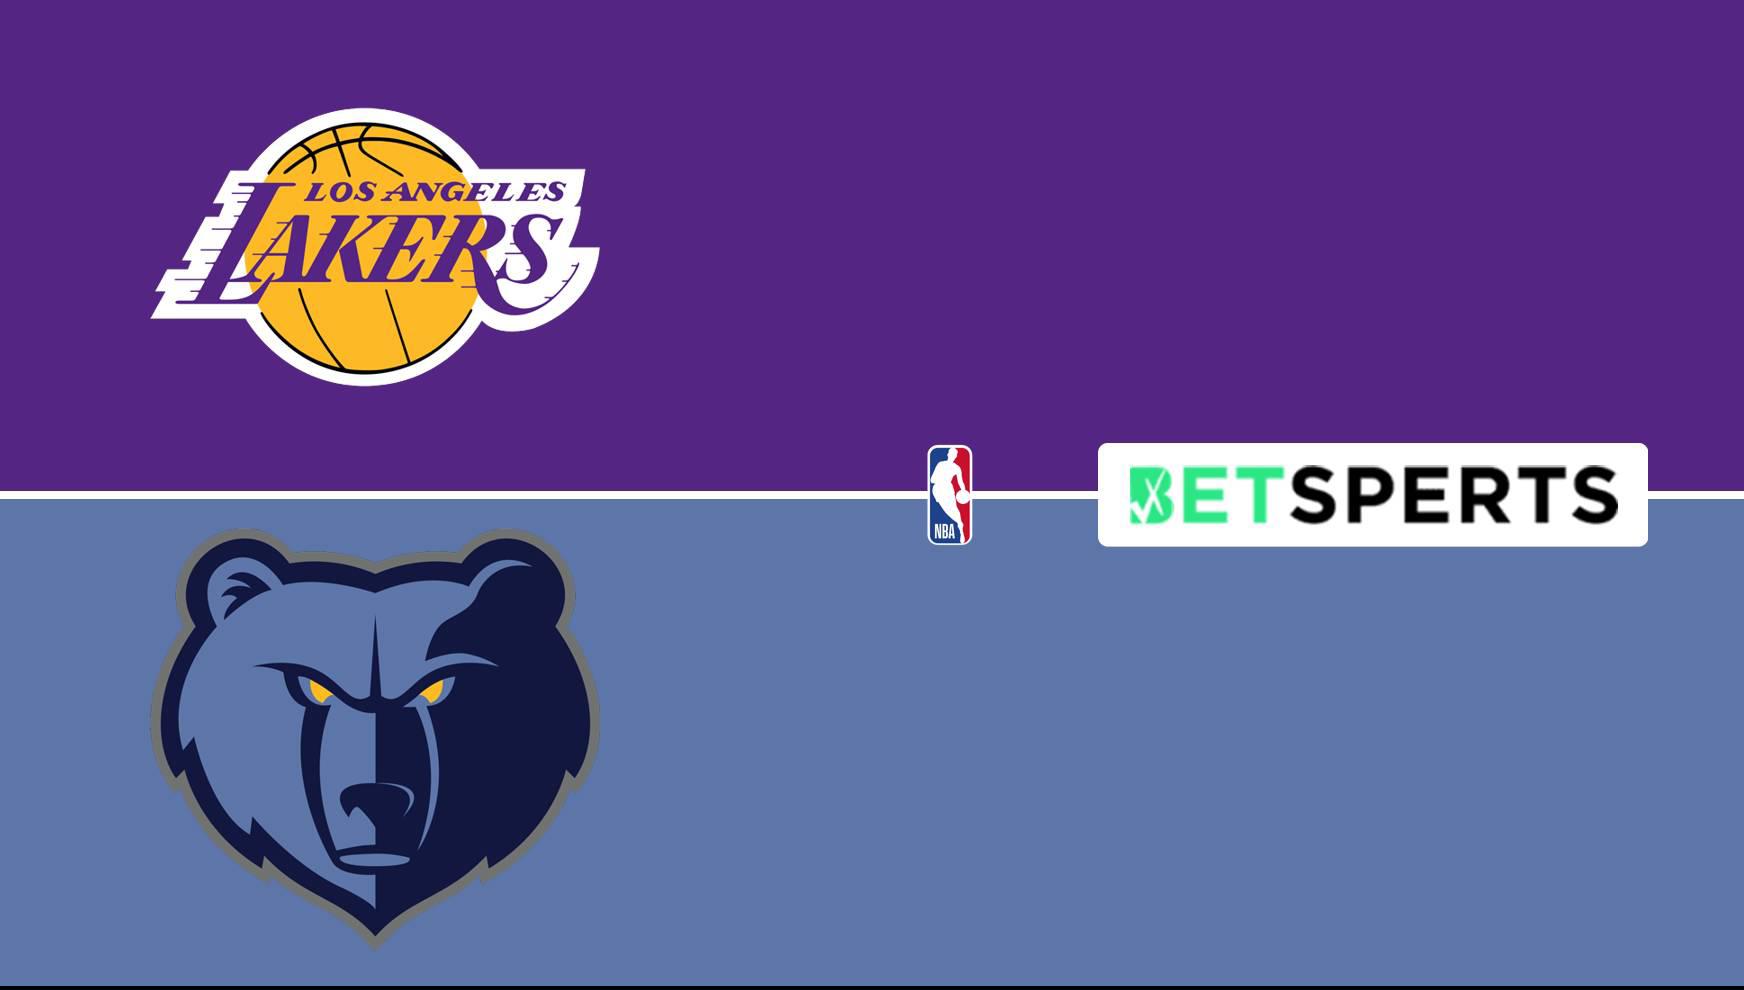 Lakers vs Grizzlies Prediction Picks, Live Odds and Moneyline - NBA Playoffs Game 6